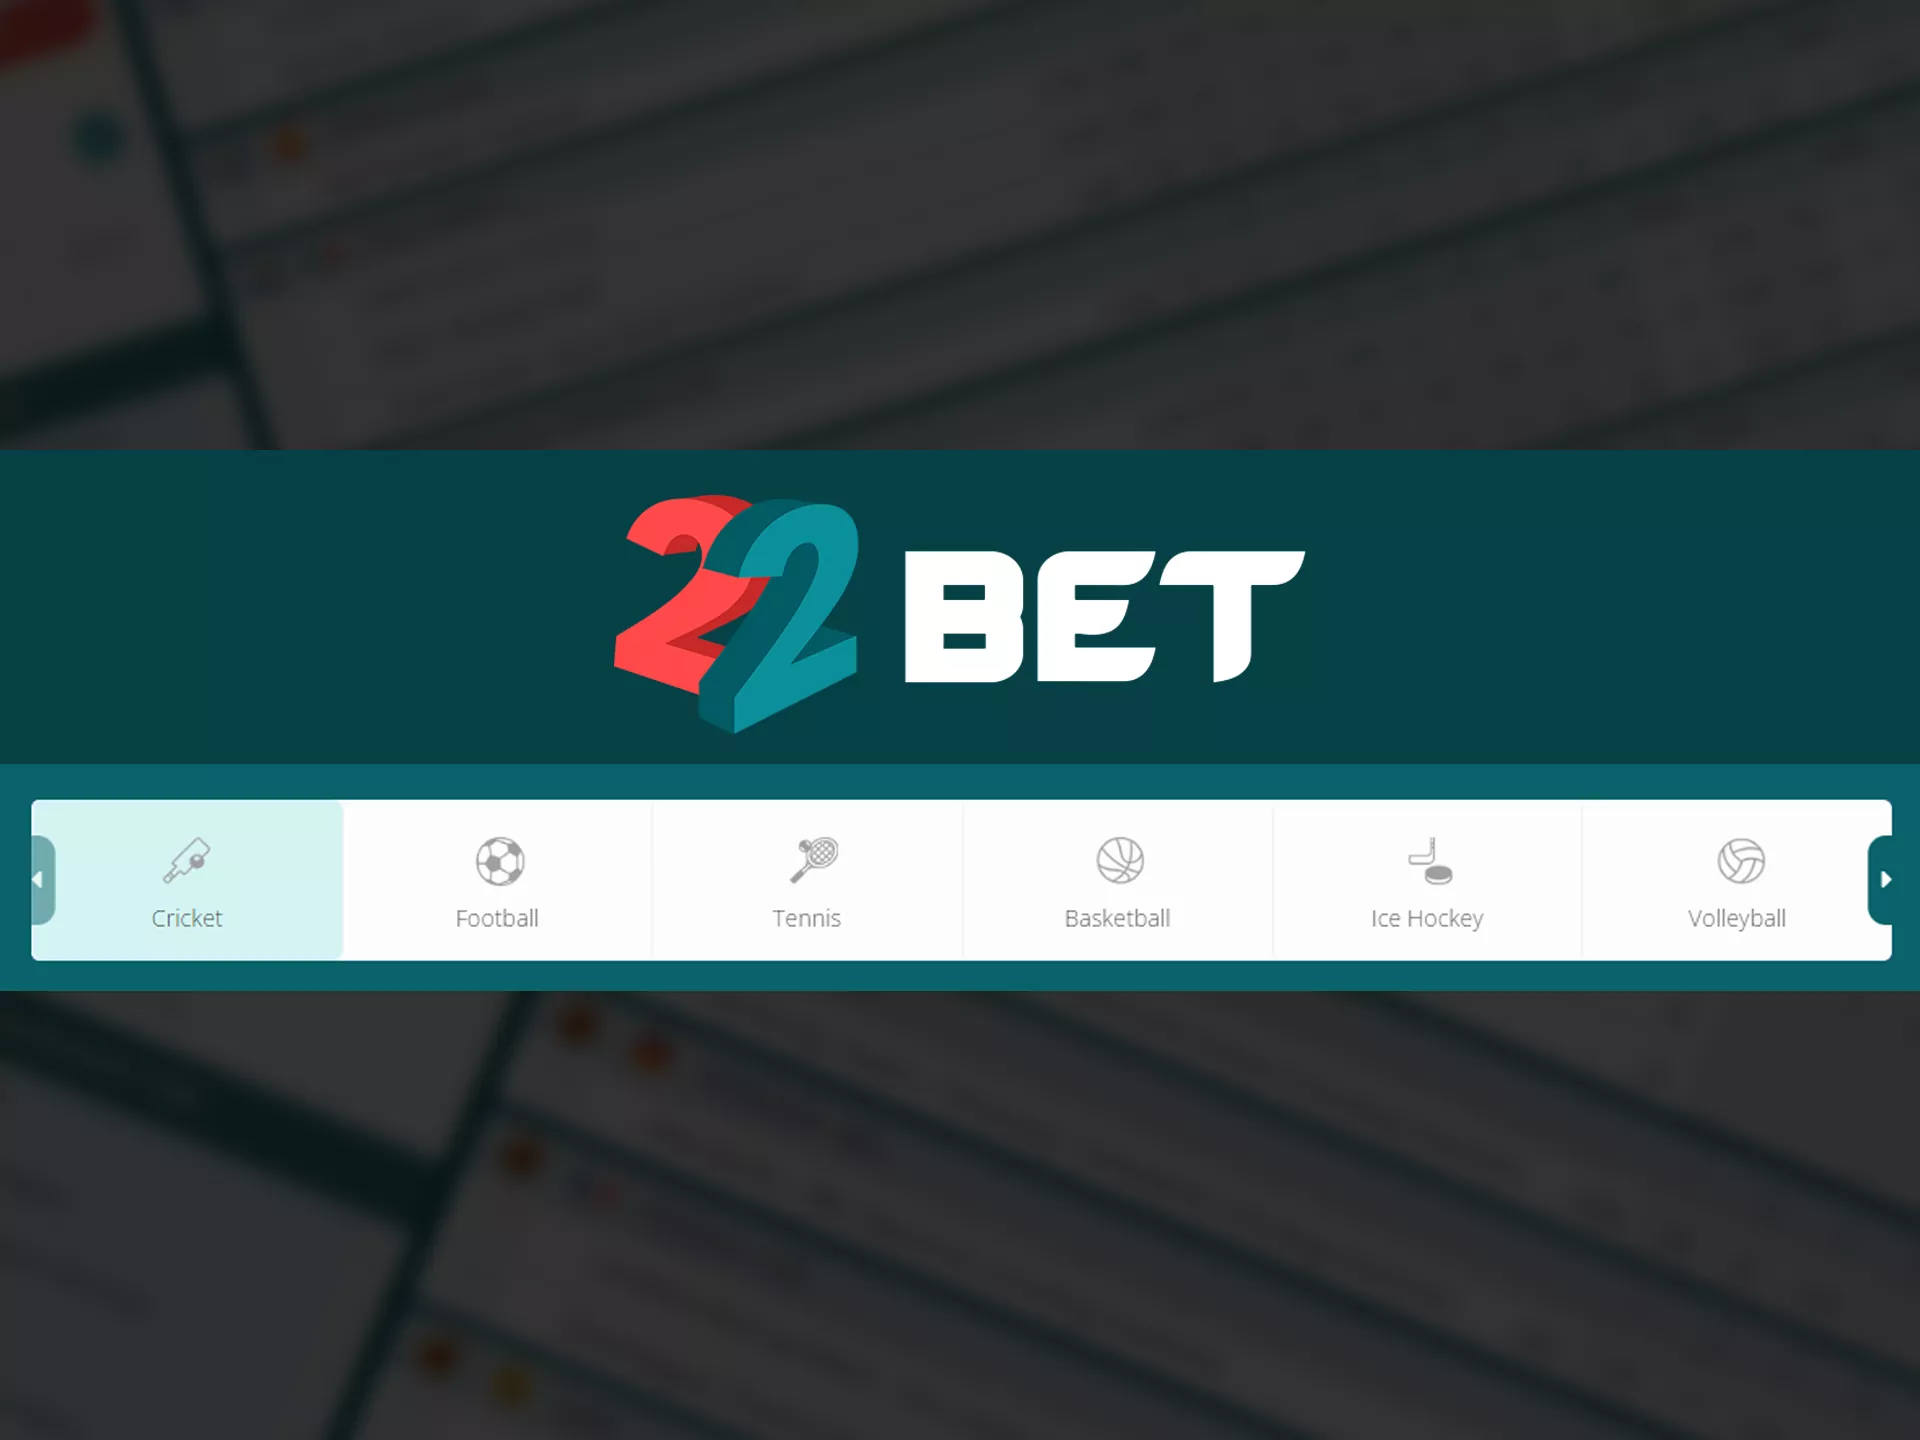 Bet on various sports at 22bet.